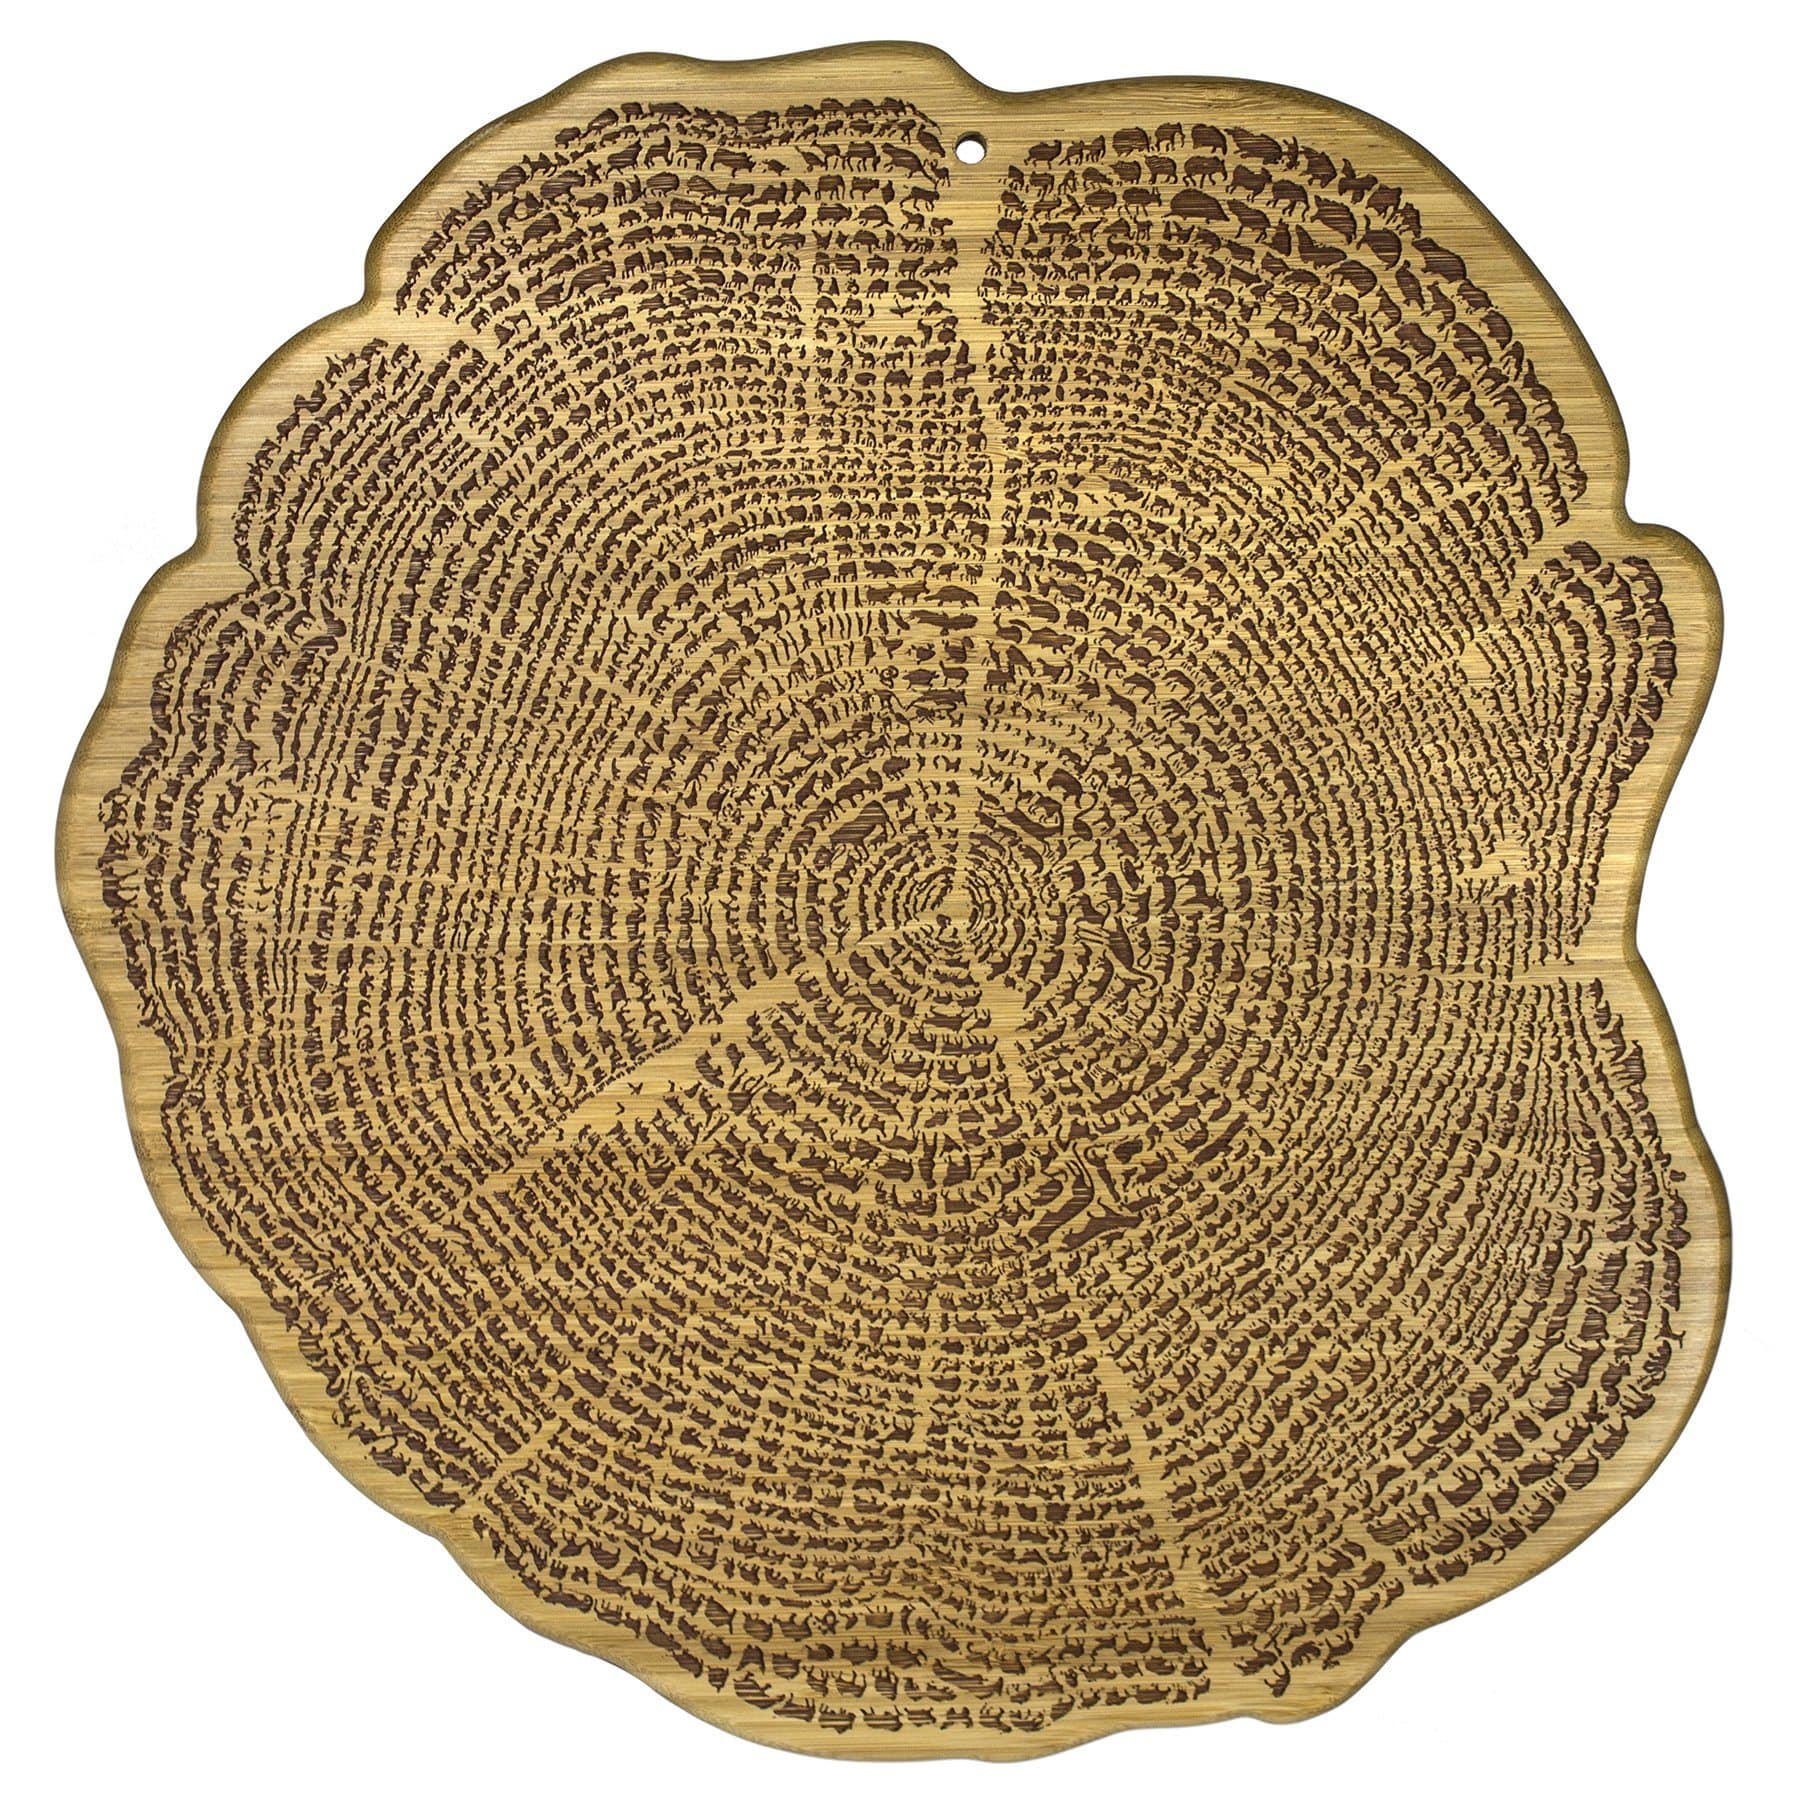 https://totallybamboo.com/cdn/shop/products/13-tree-of-life-serving-board-totally-bamboo-746537.jpg?v=1627929569